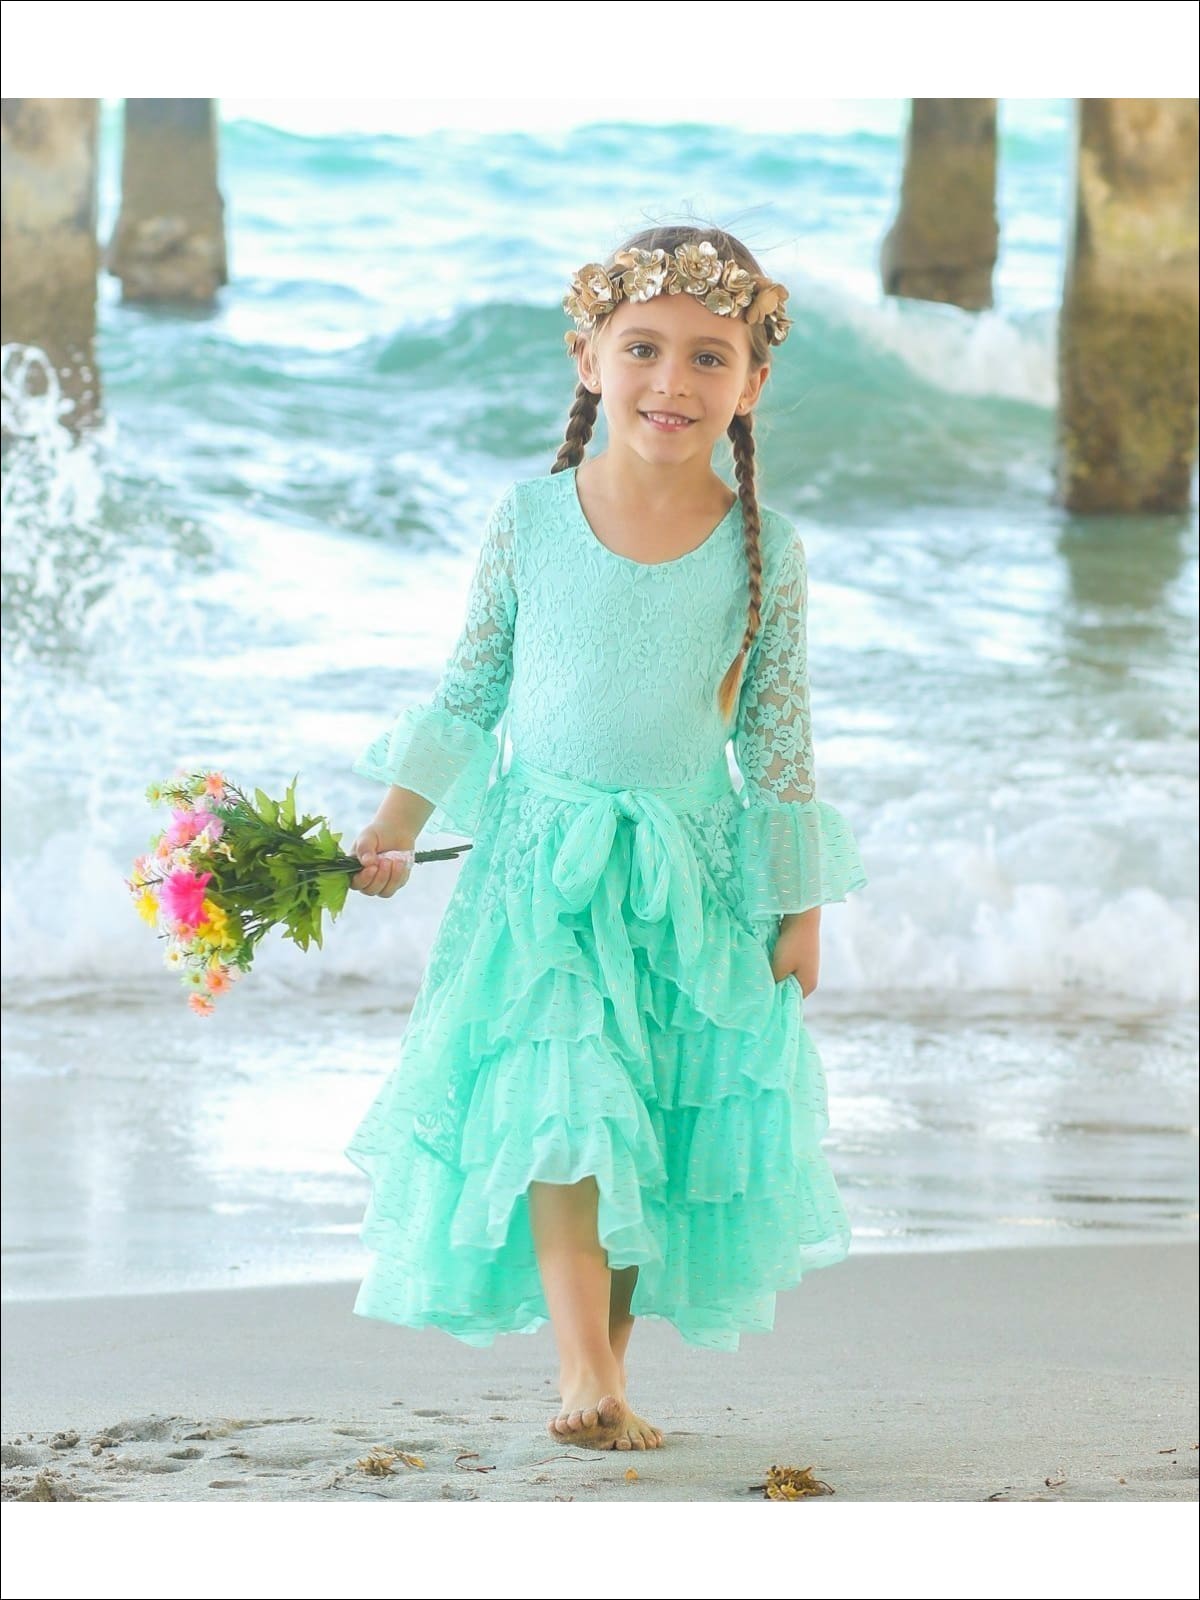 Girls Lace Bell Sleeve Tiered Ruffled Dress with Sash - Mint / 2T/3T - Girls Spring Dressy Dress